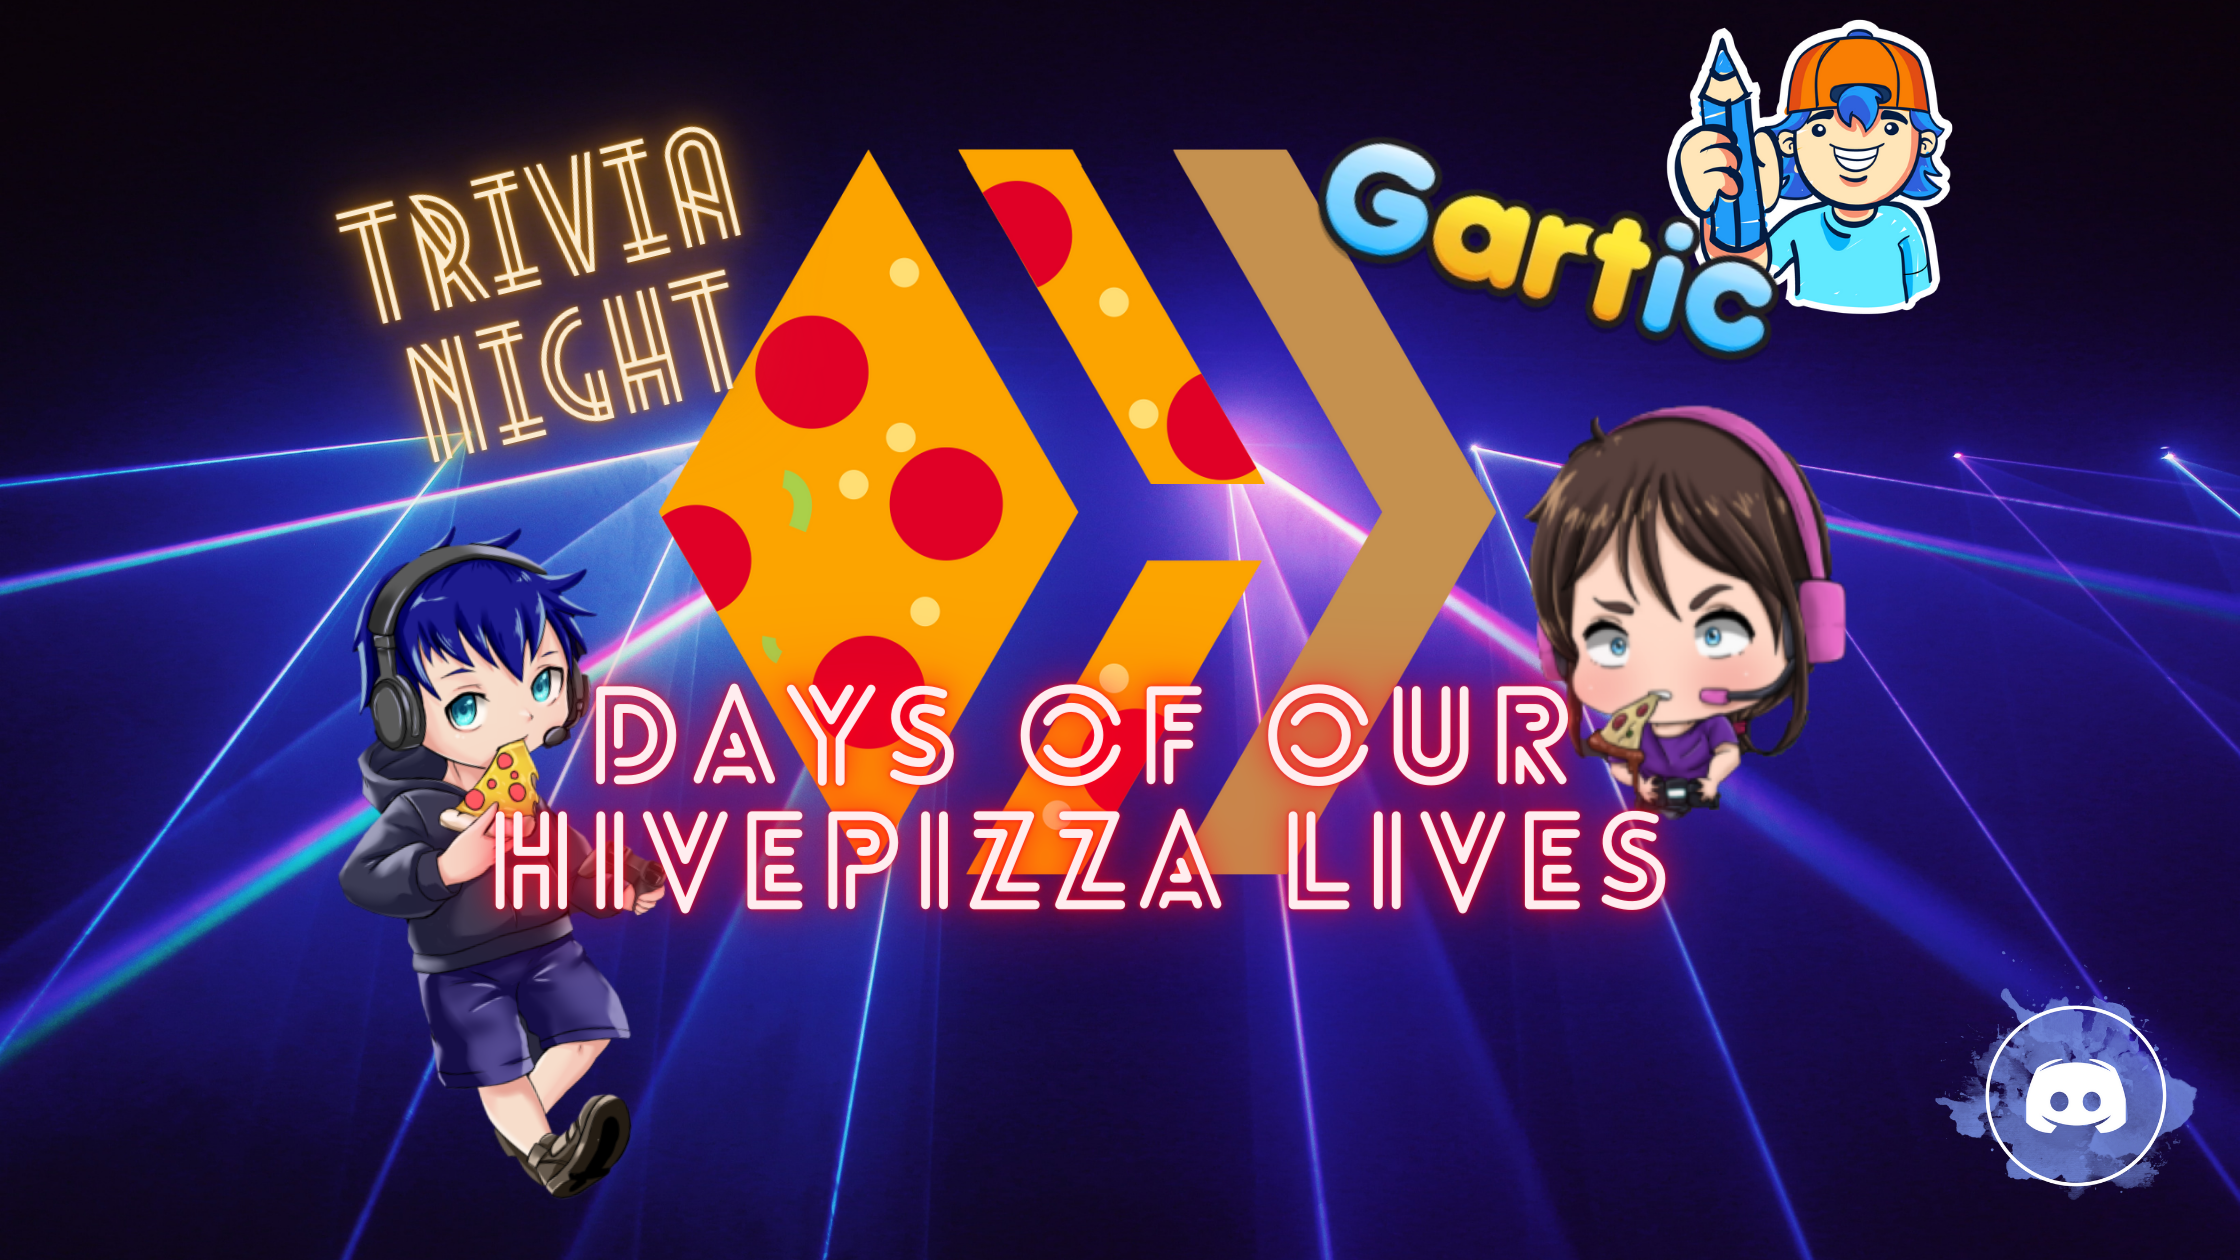 @blitzzzz/trivia-and-gartic-with-pizza-aliens-living-among-us-its-always-b